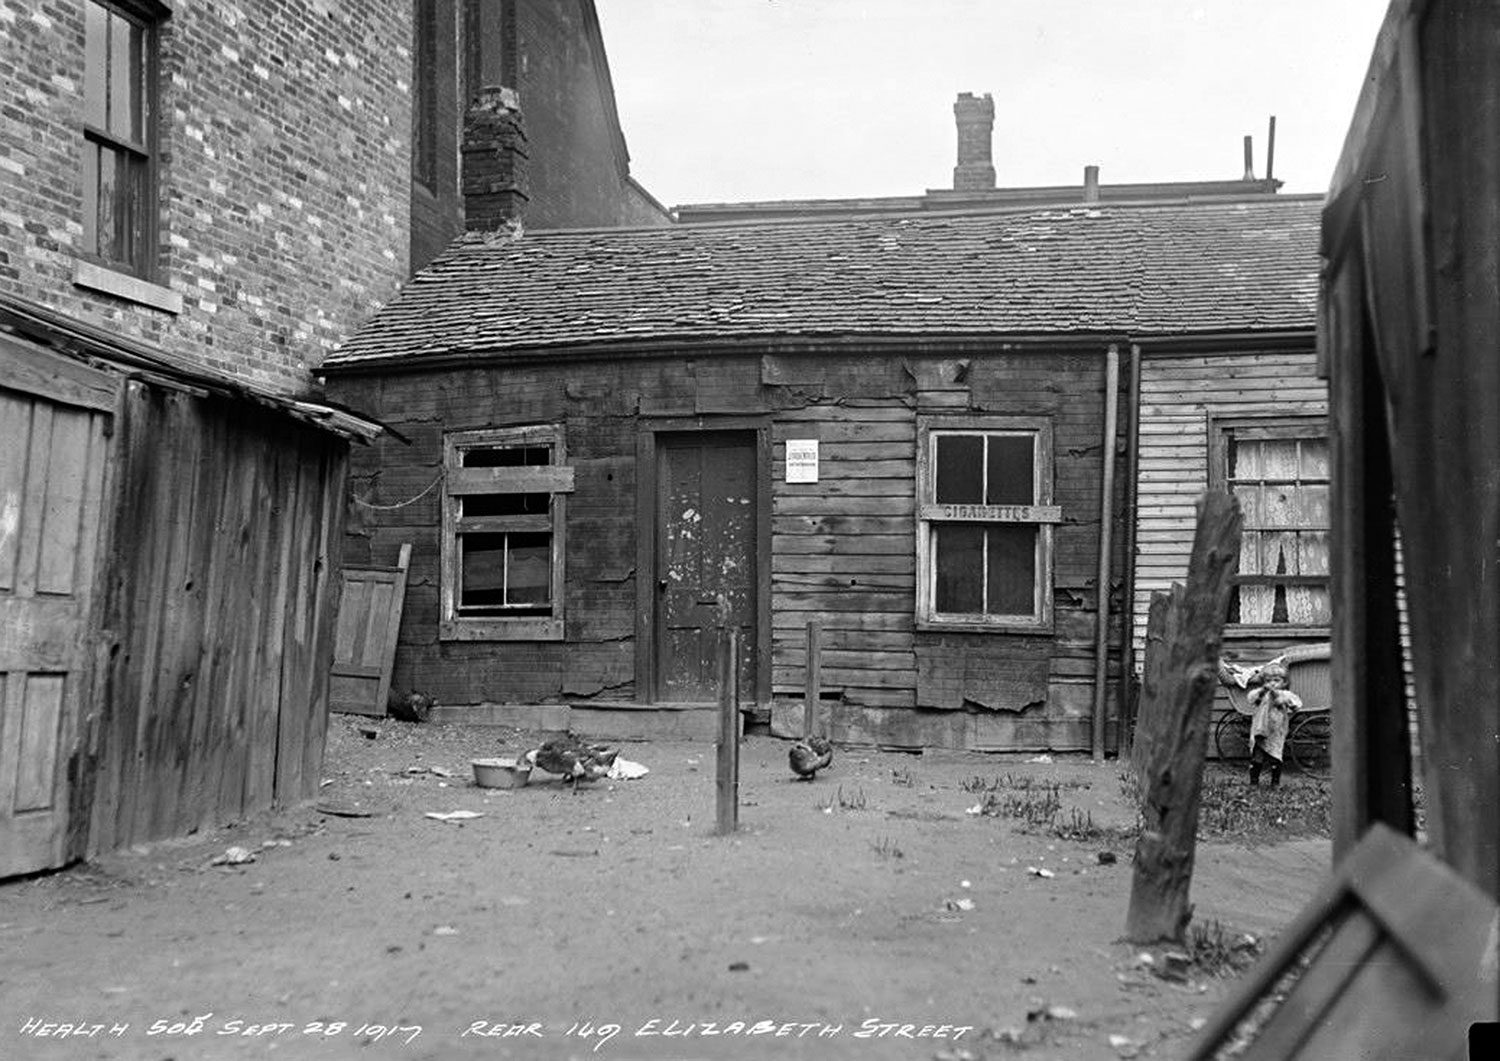 Condemned house, 149 Elizabeth Street, Toronto (rear view), September 28, 1917. City of Toronto Archives (Fonds 200, Series 372, Subseries 32, Item 505).